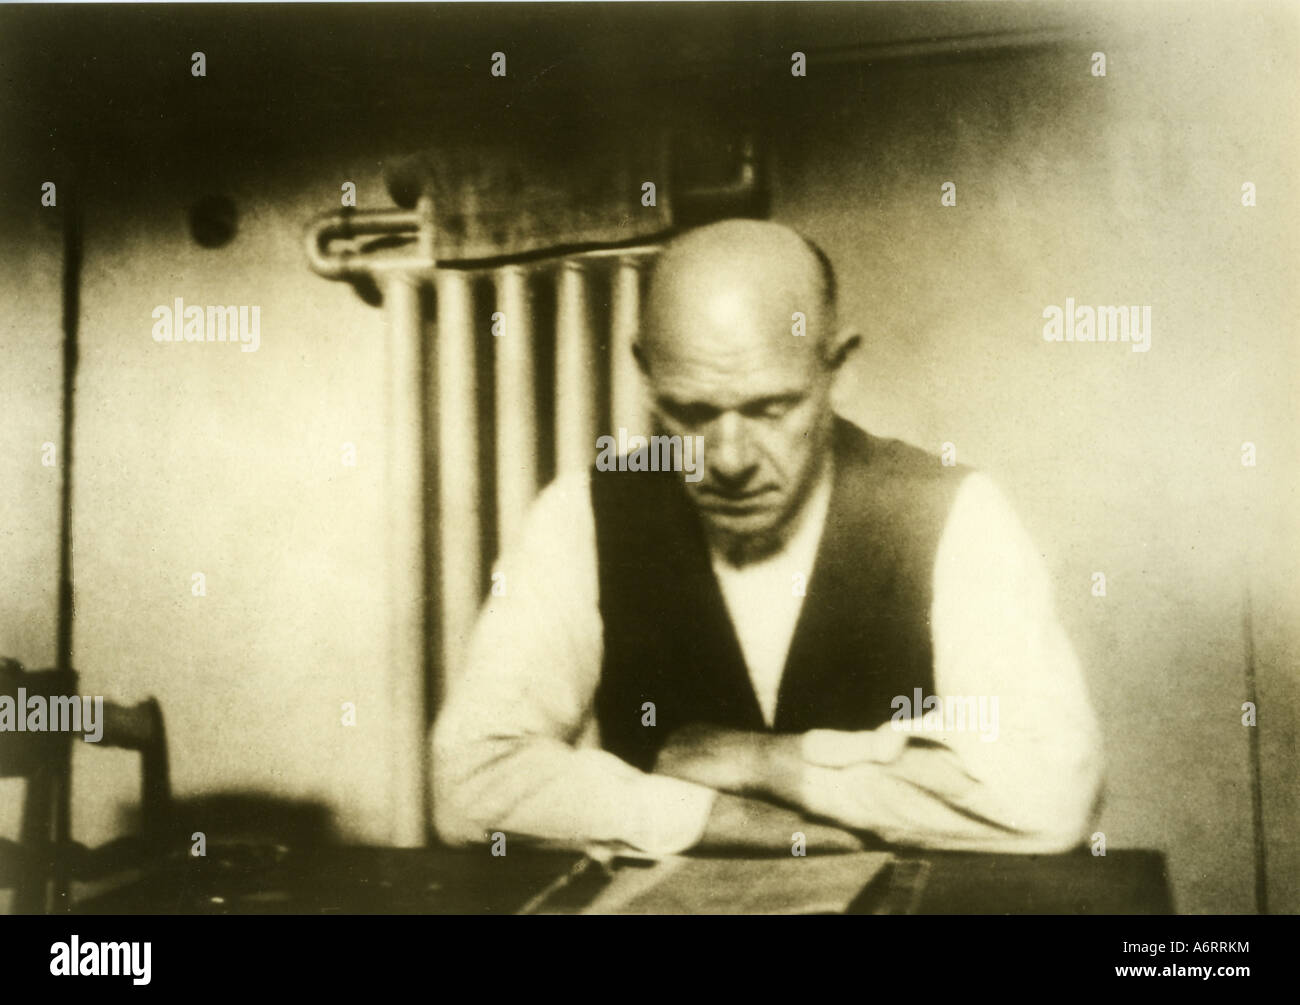 Thälmann Ernst 16 4 1886 28 8 1944 German politician KPD in his prison cell Hannover 1943 photographed by hist daugth Stock Photo